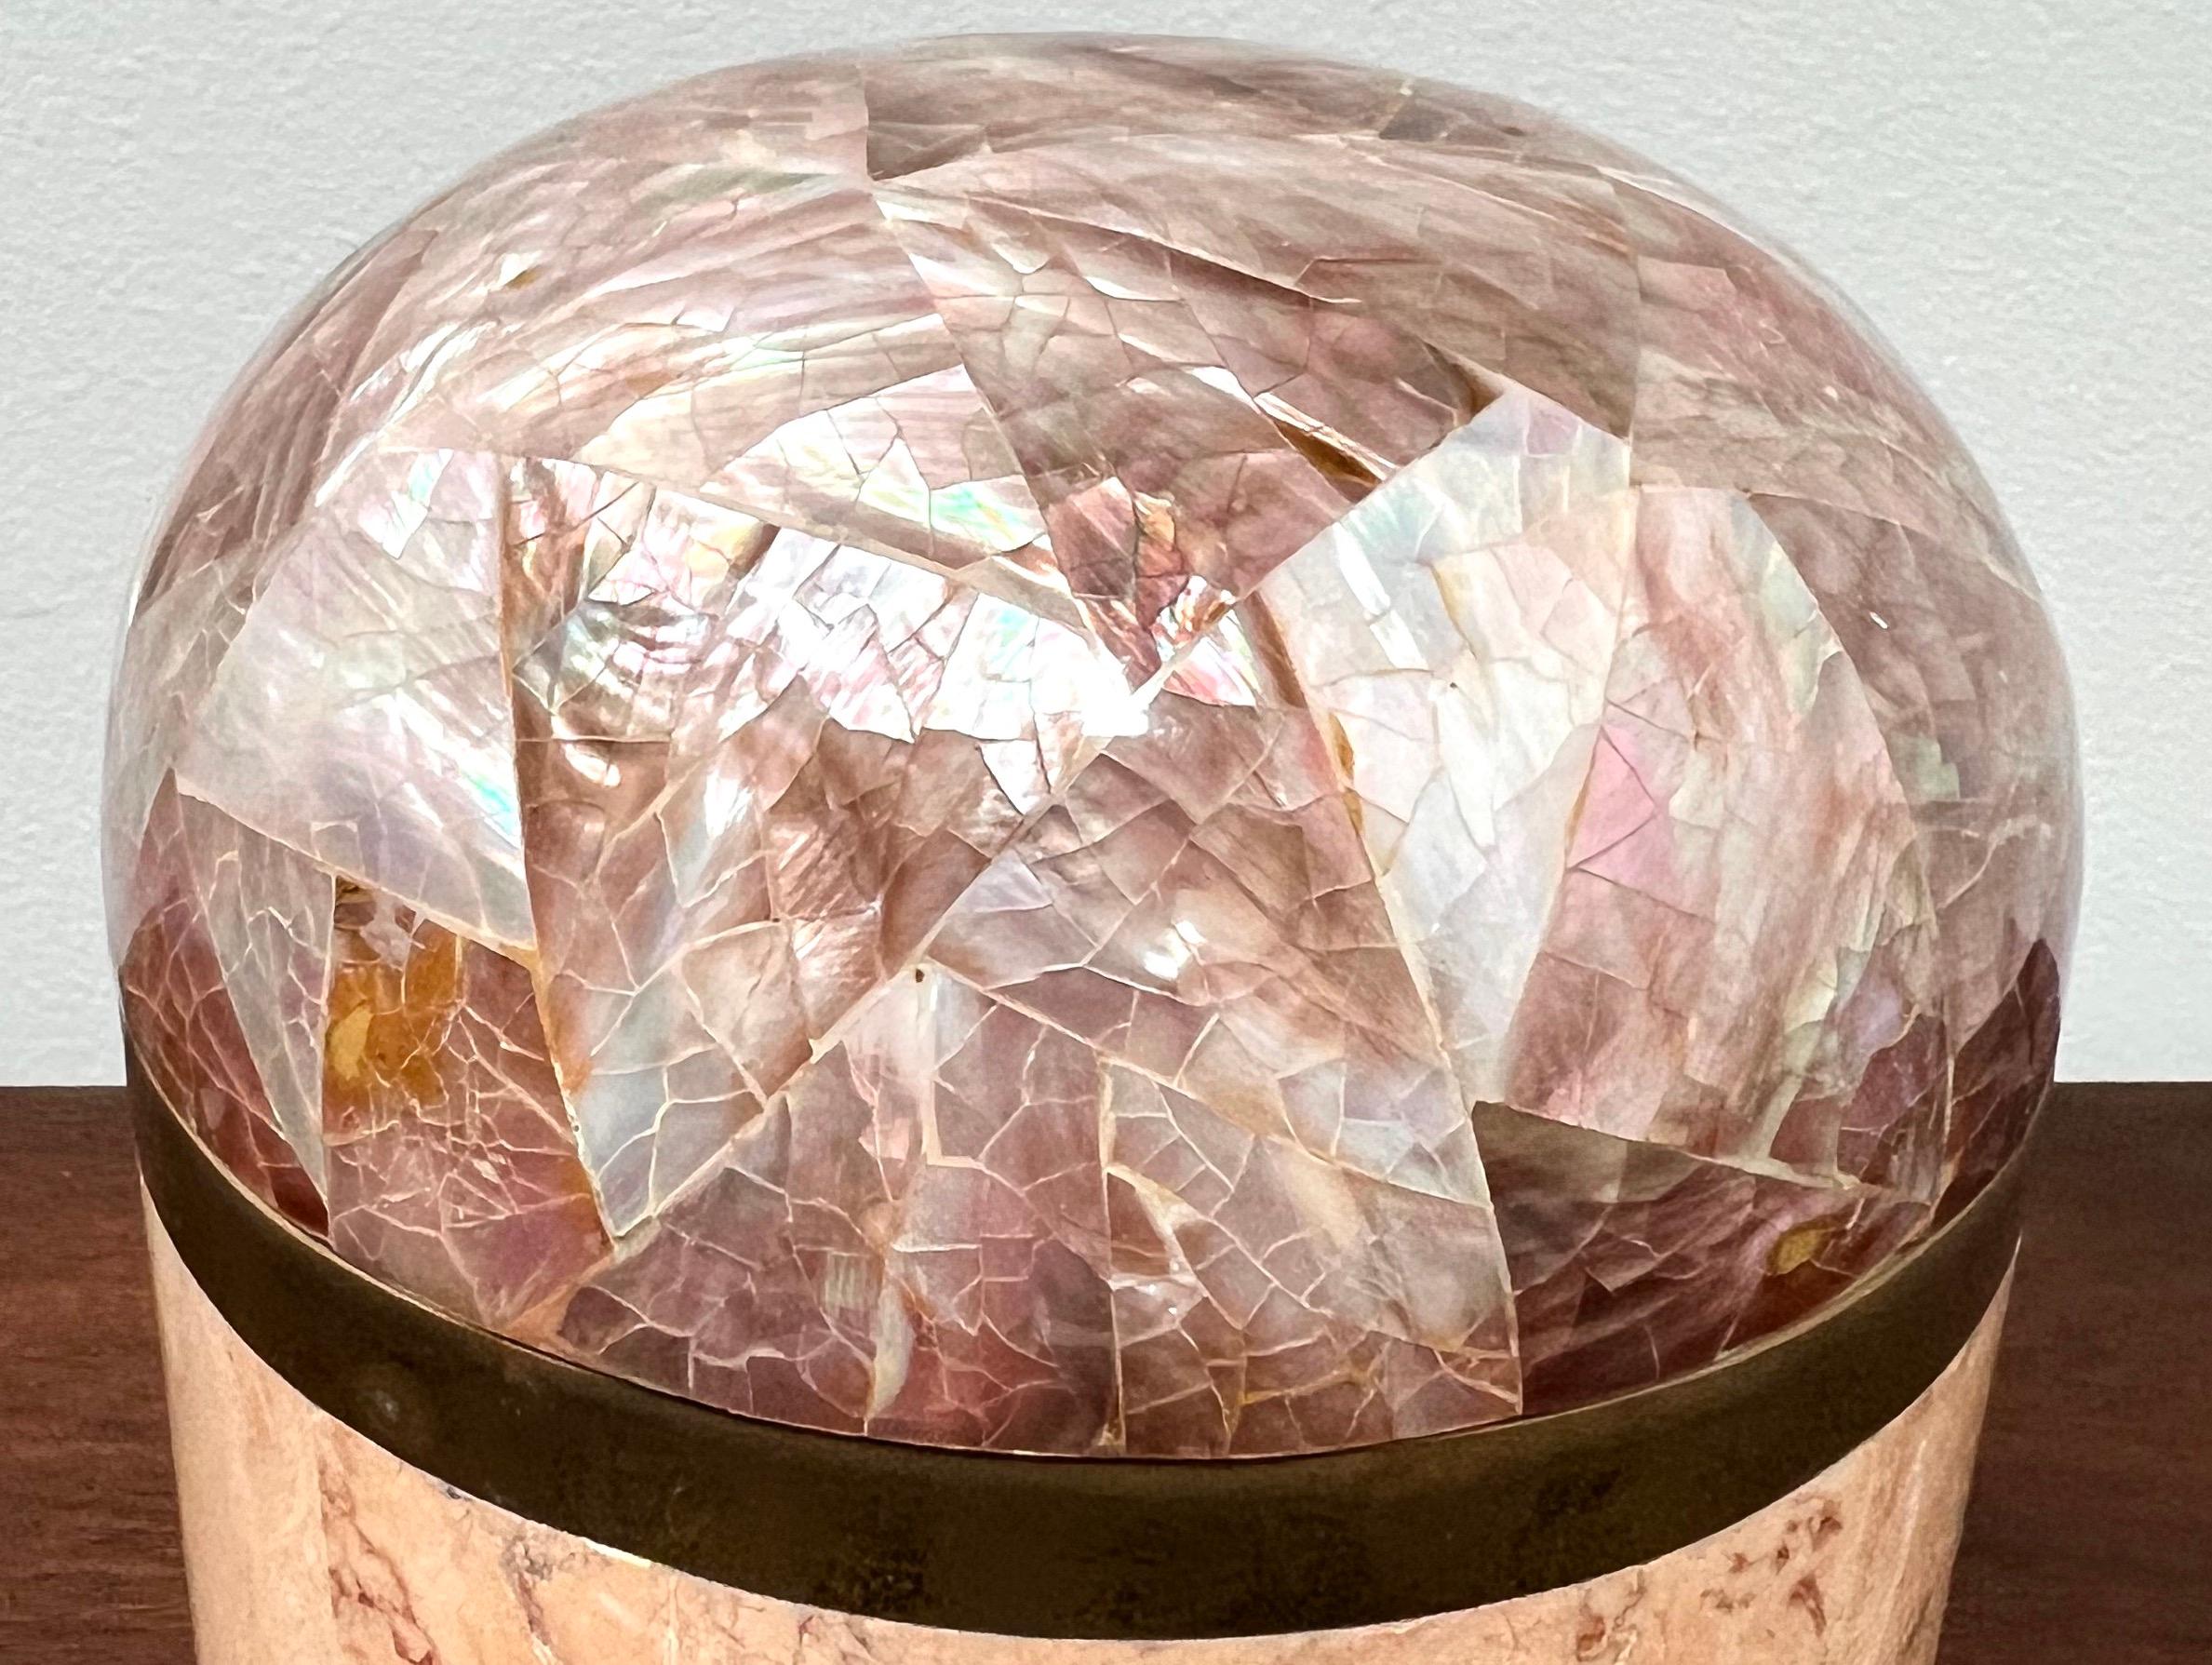 American KINDER-HARRIS DARA 1980's Pink Tessellated Stone Round Box wth Dome Lid For Sale